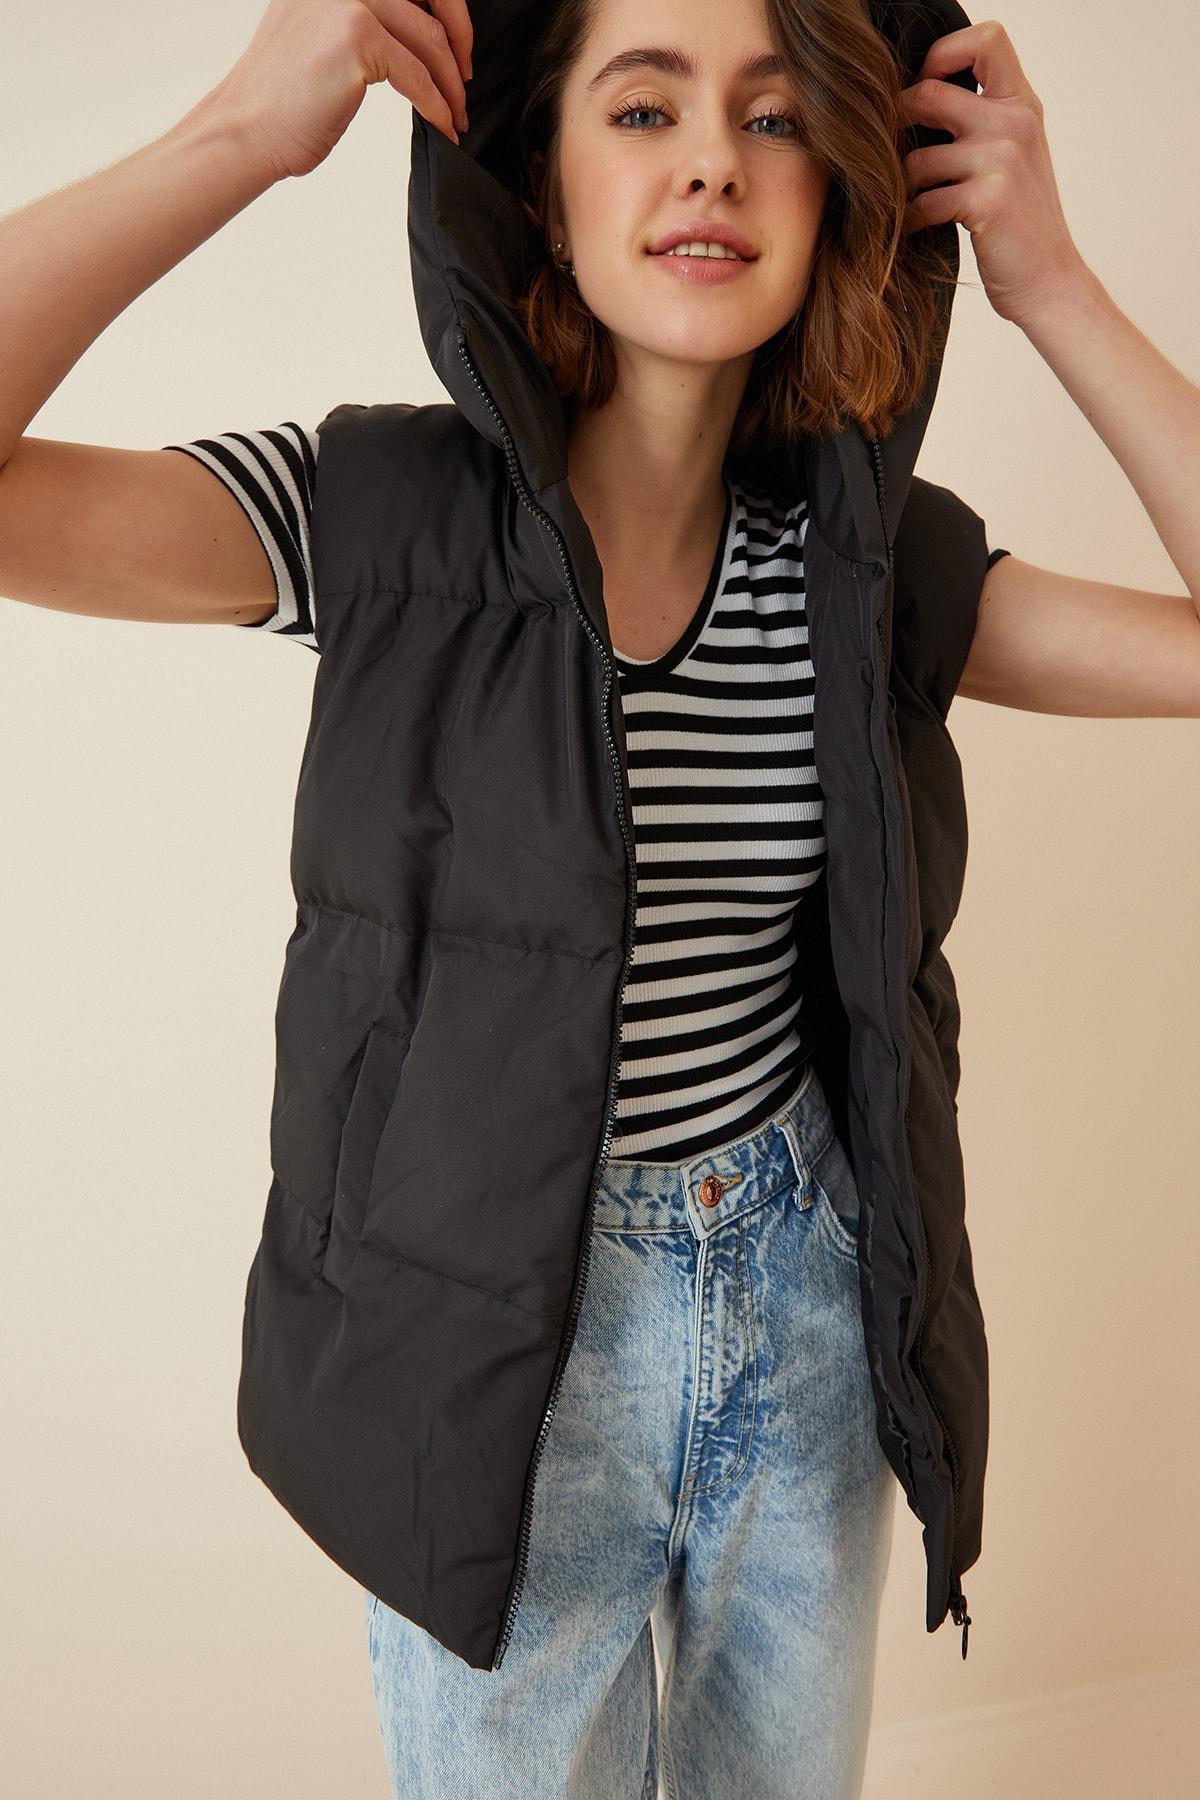 Happiness Istanbul - Black Hooded Puffer Vest